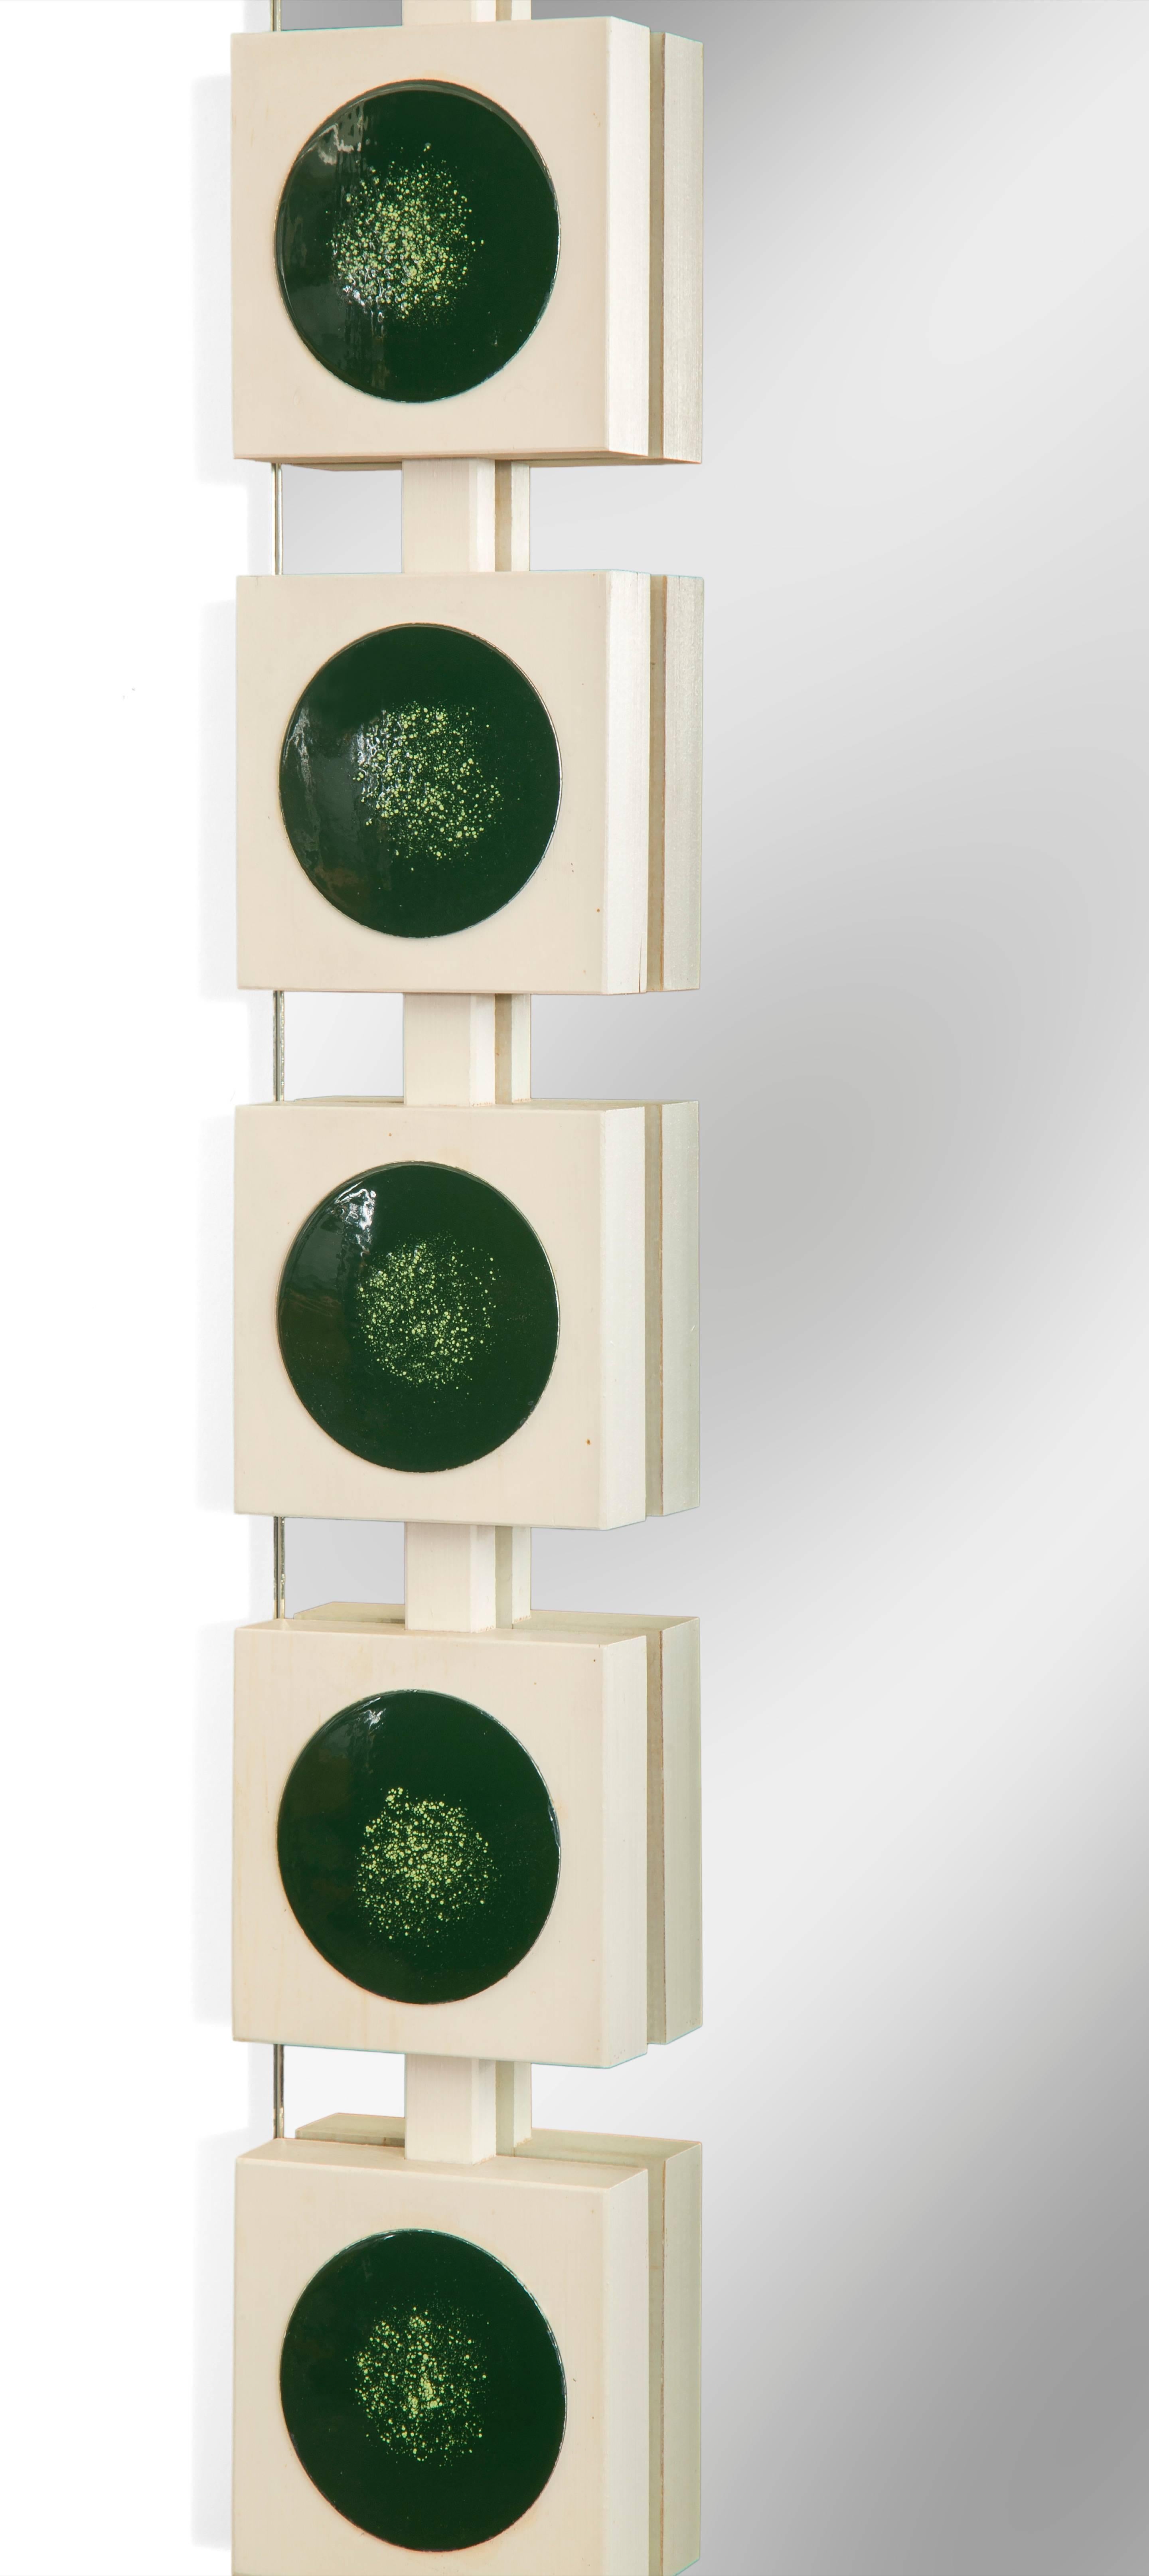 Circles and squares, enamel and painted wood, simple and complex, beautiful mirror. 
The rectangular mirror plate framed by a series of ebonized wooden blocks inlaid with enamel discs. LaBELed:   AB GLAS & TRÄ (G&T) Nr. GT 7090

In great